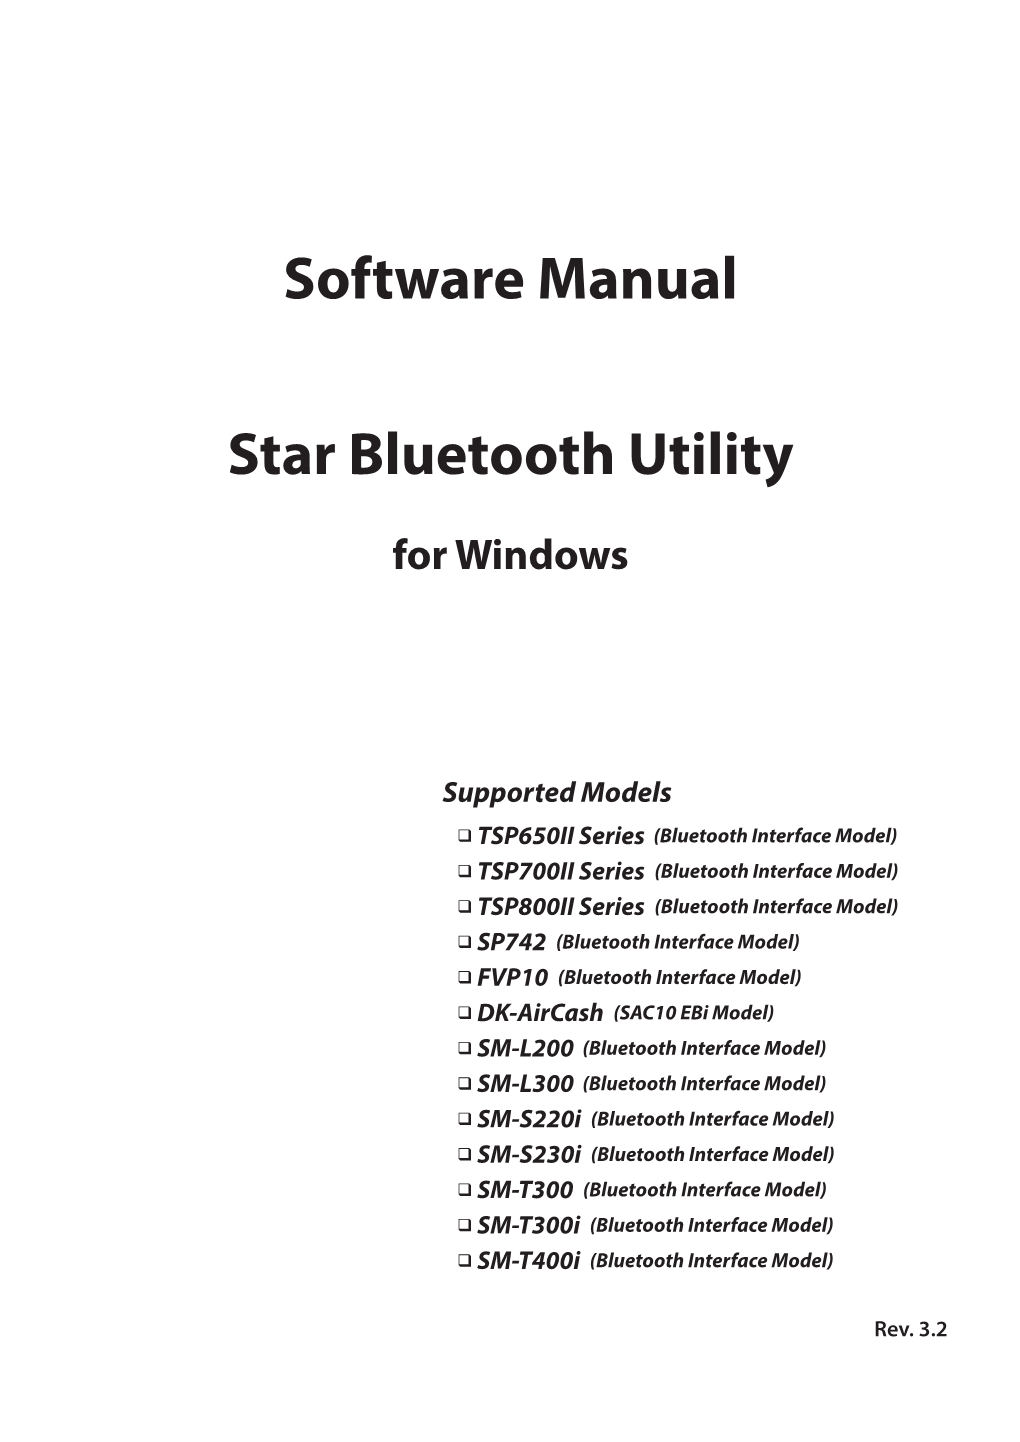 Star Bluetooth Utility for Windows Software Manual